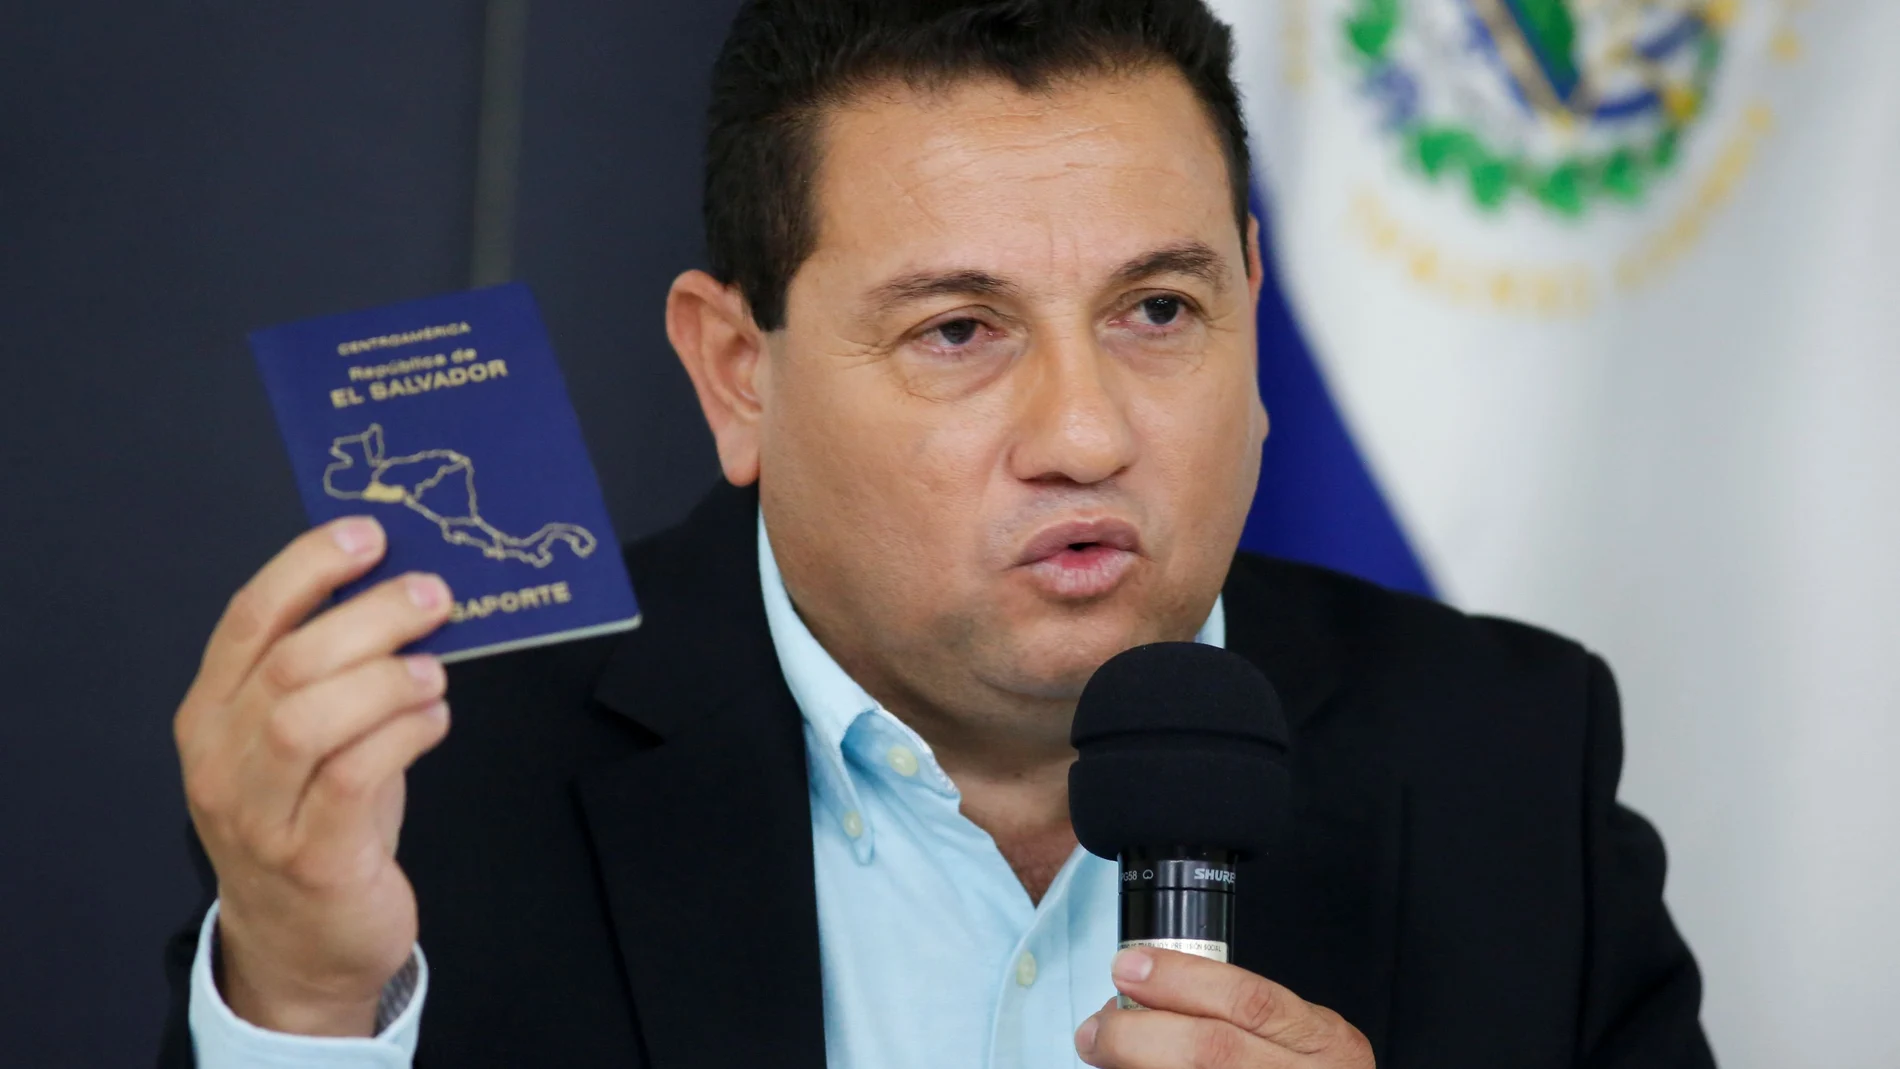 El Salvador's Labor Minister Rolando Castro shows his passport during a news conference while saying he gives up applying for a U.S. visa after being mentioned on the Engel list in San Salvador, El Salvador July 5, 2021. REUTERS/Jose Cabezas